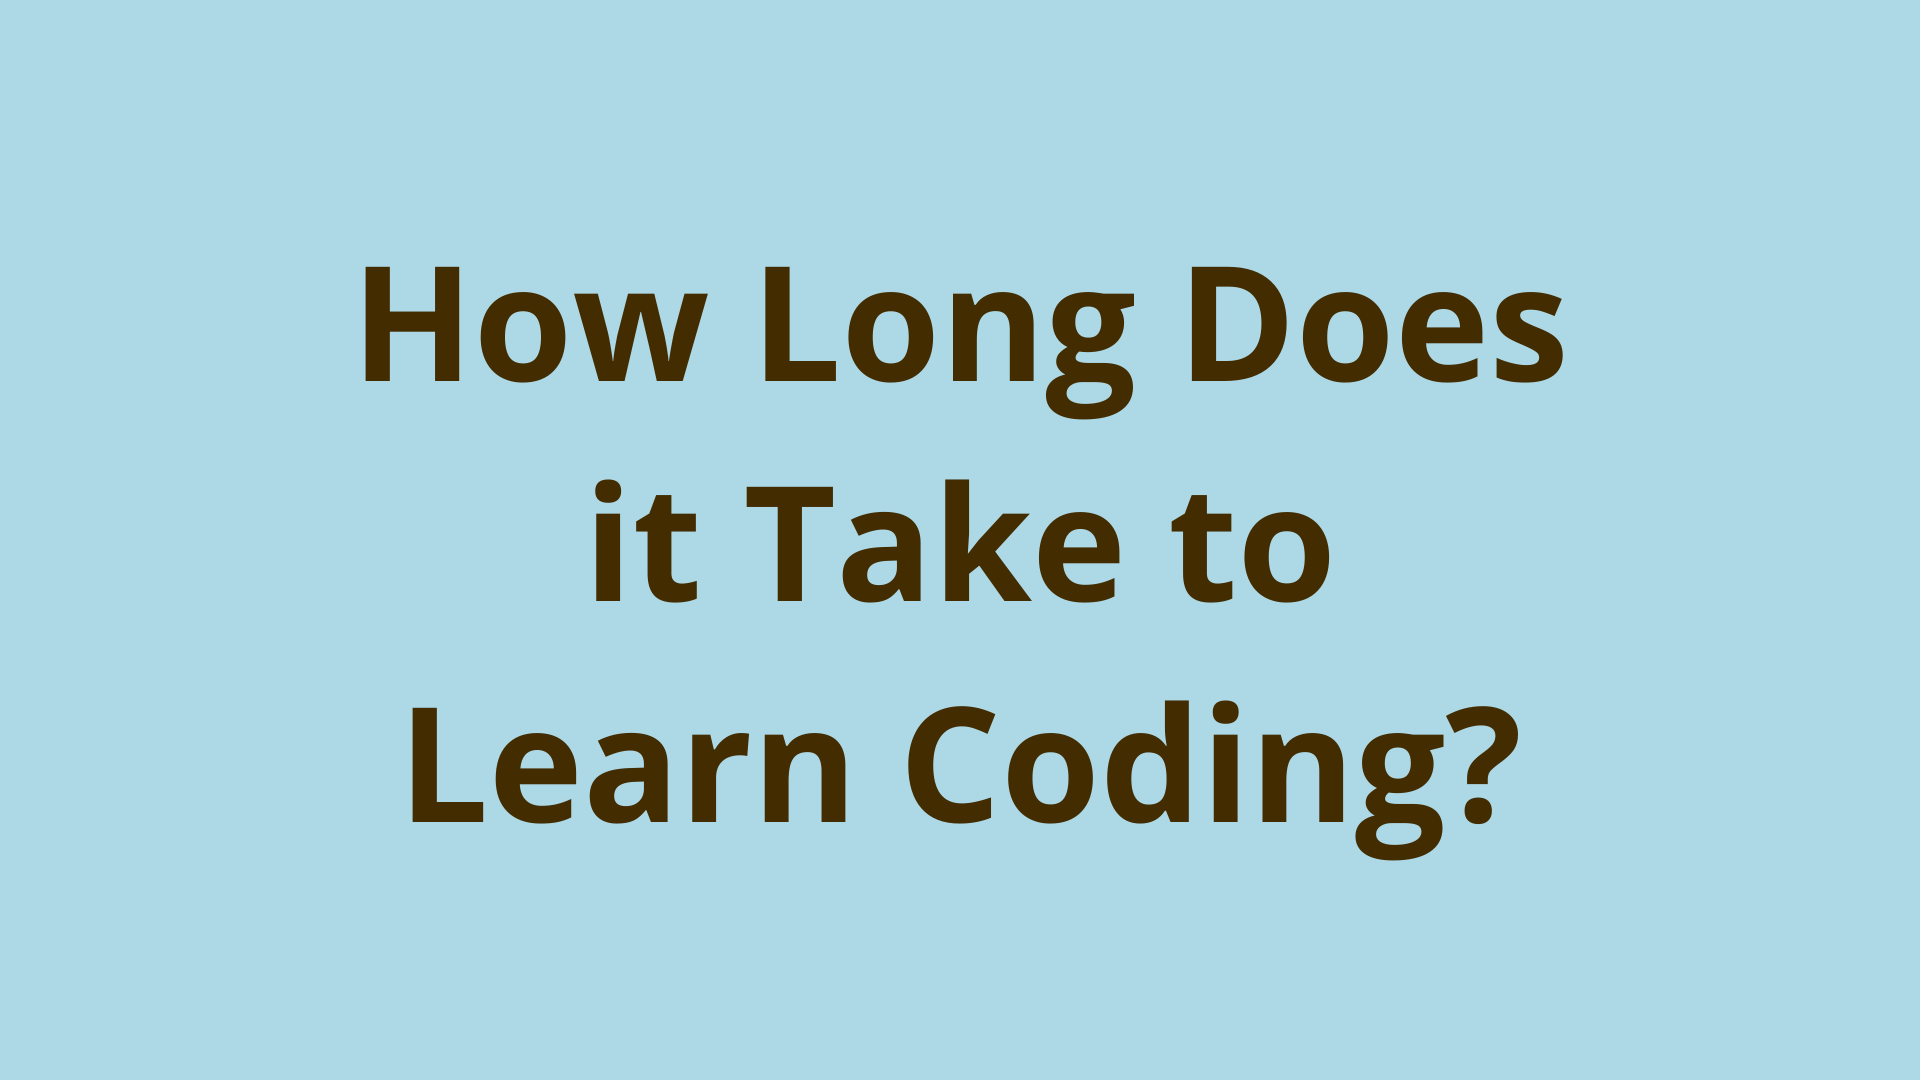 Image of How long does it take to learn coding?